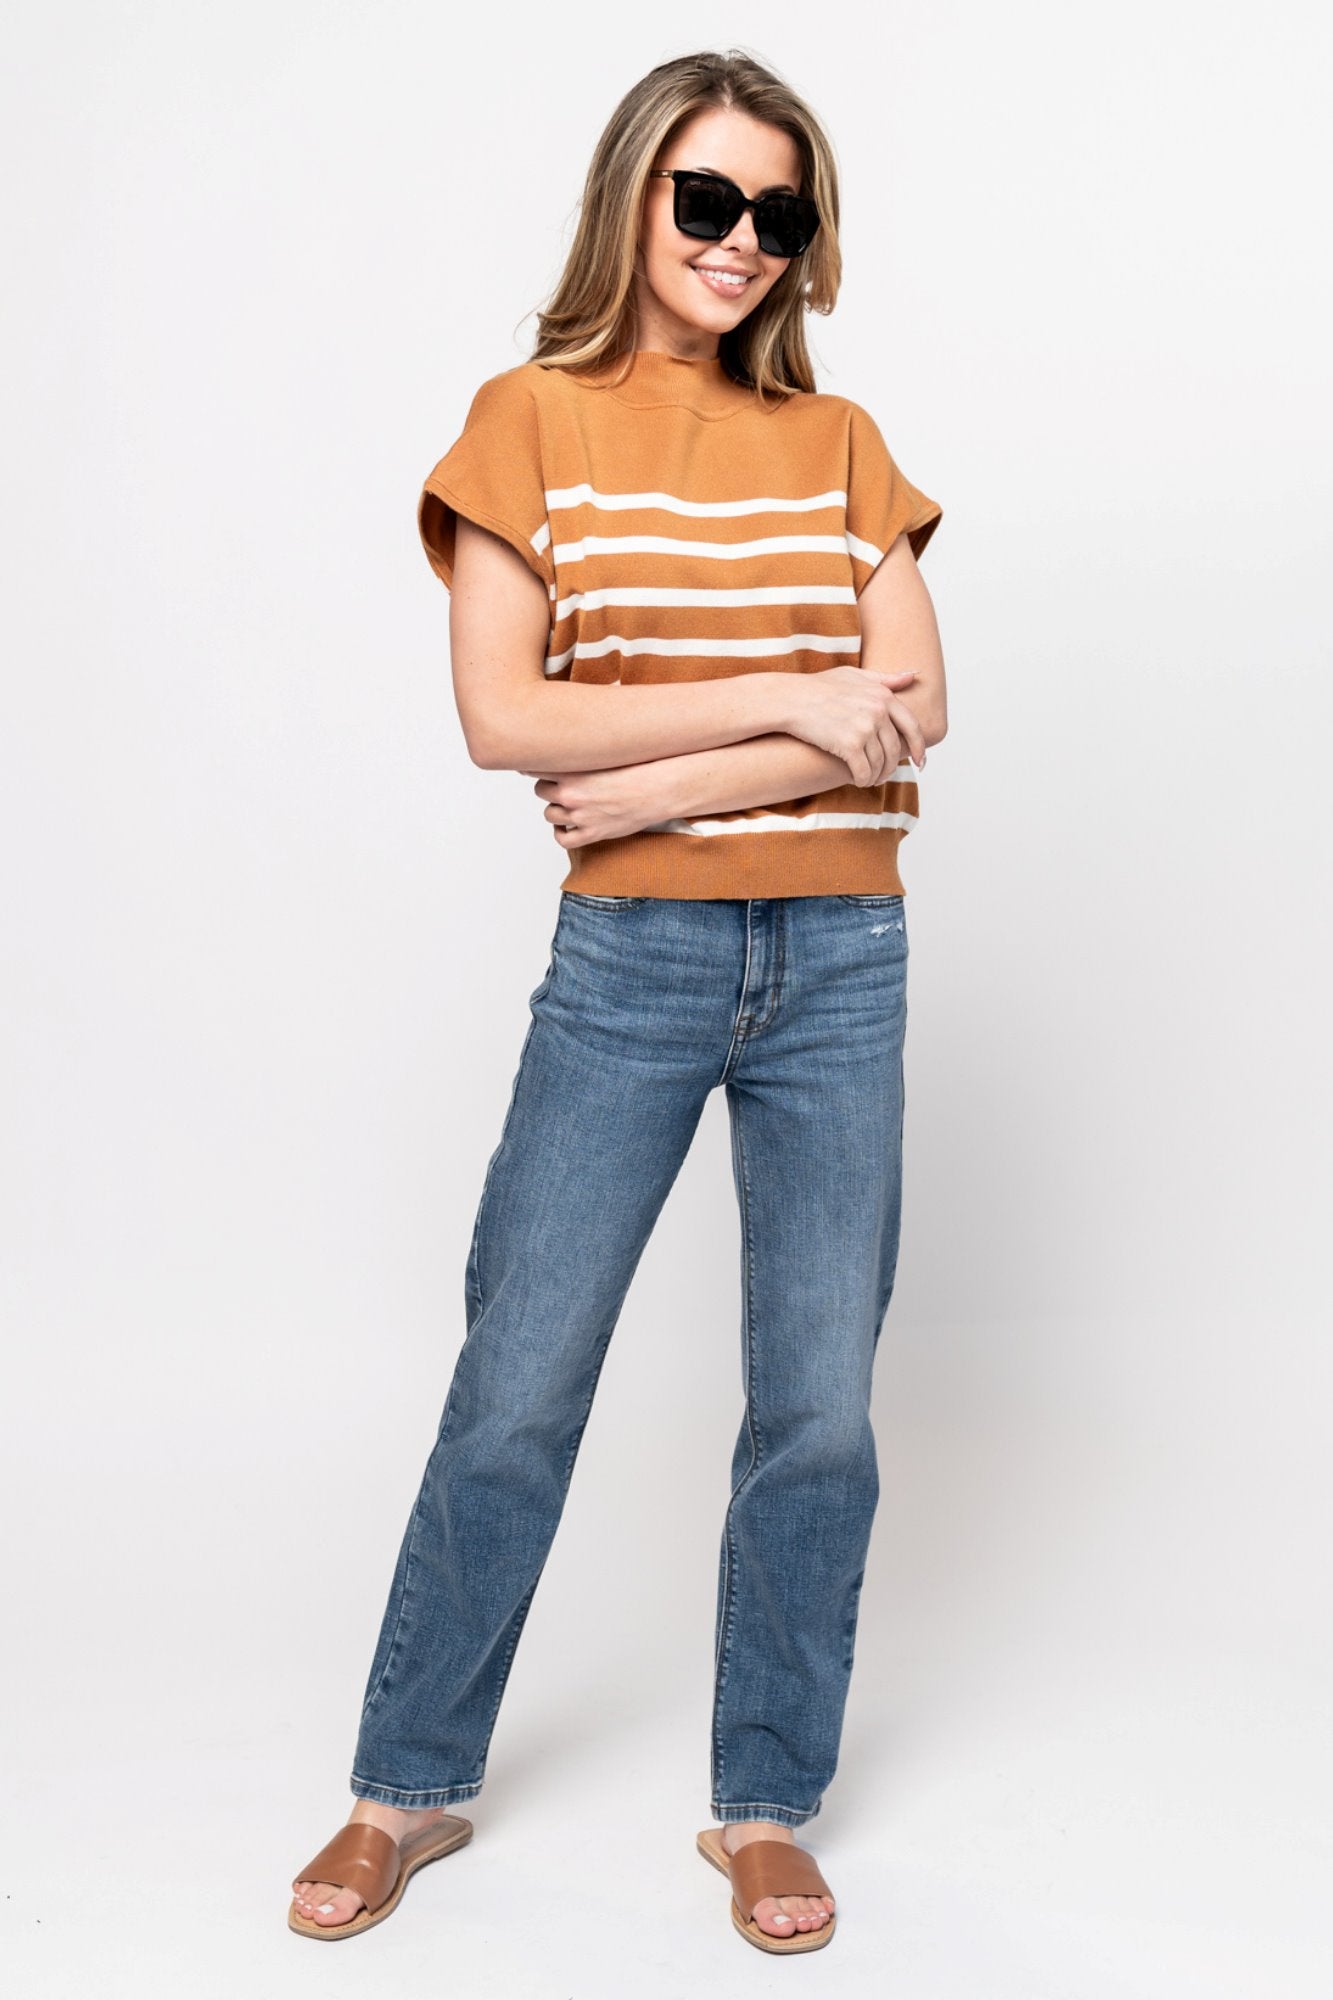 Wrenley Jeans Clothing Holley Girl 